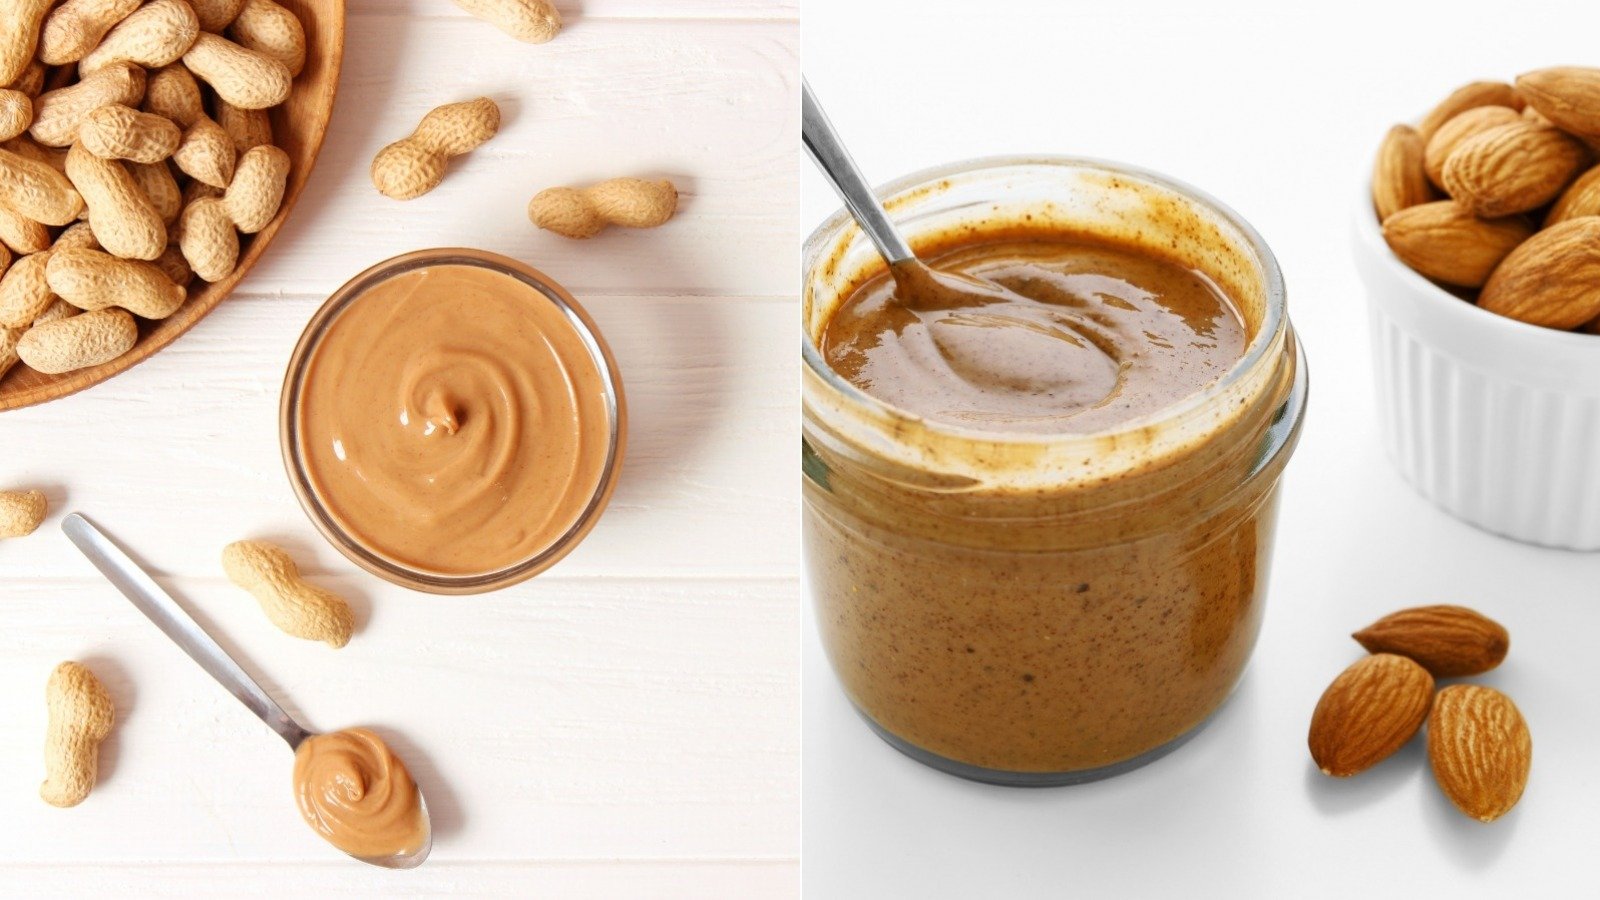 Peanut Butter Vs Almond Butter: Which One Is Better For You? - Health Digest